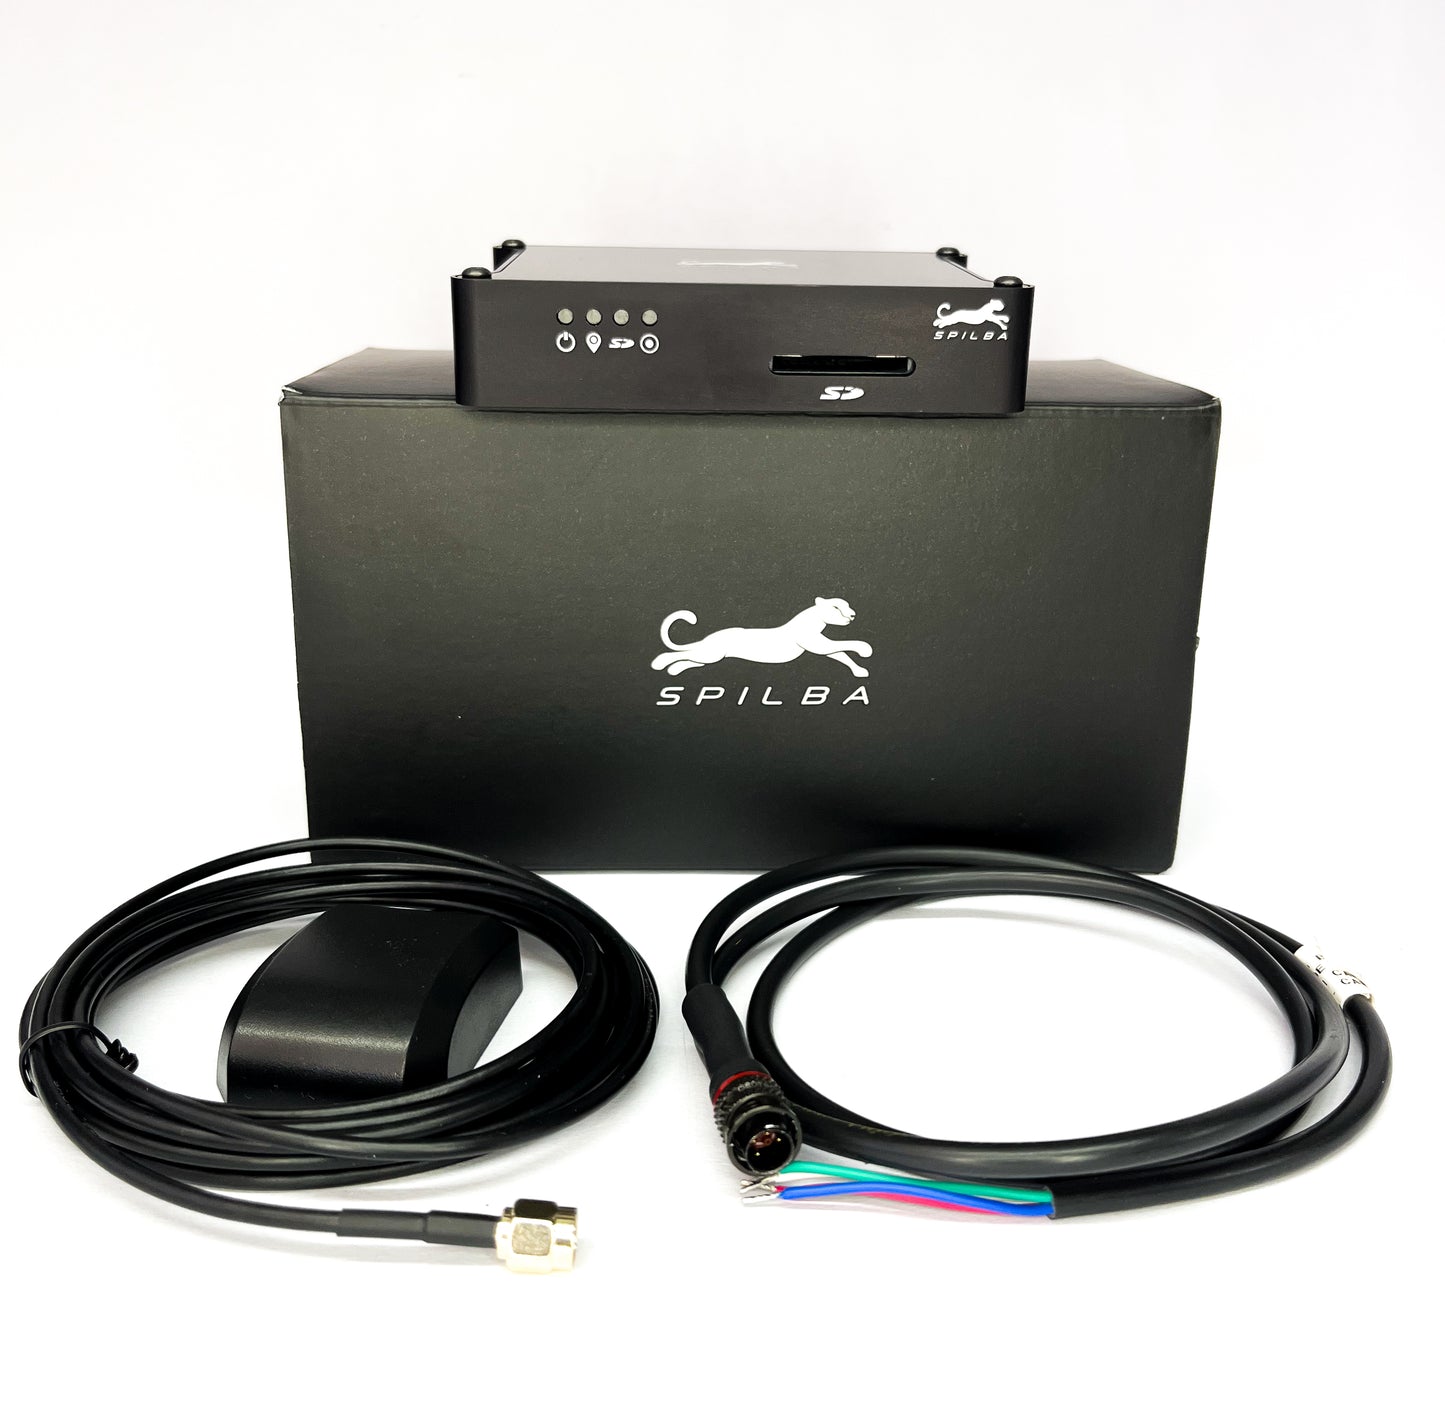 ONYX 2 - Data Acquisition System - 3 in 1 - 25Hz GNSS - CAN BUS